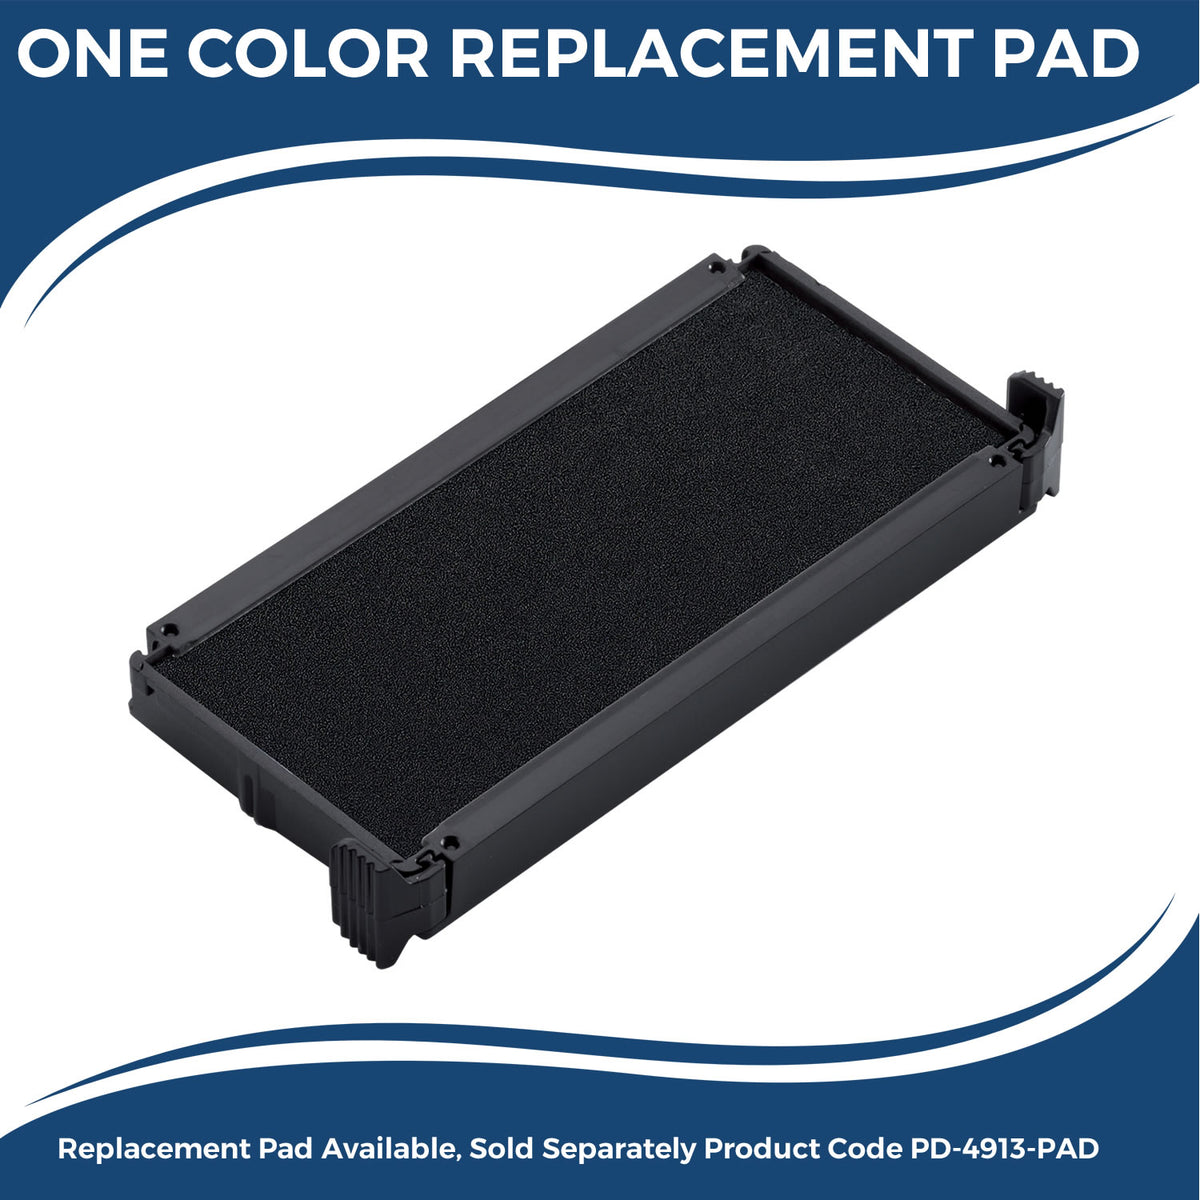 Large Self-Inking Brilliant Stamp 5595S Large Replacment Pad